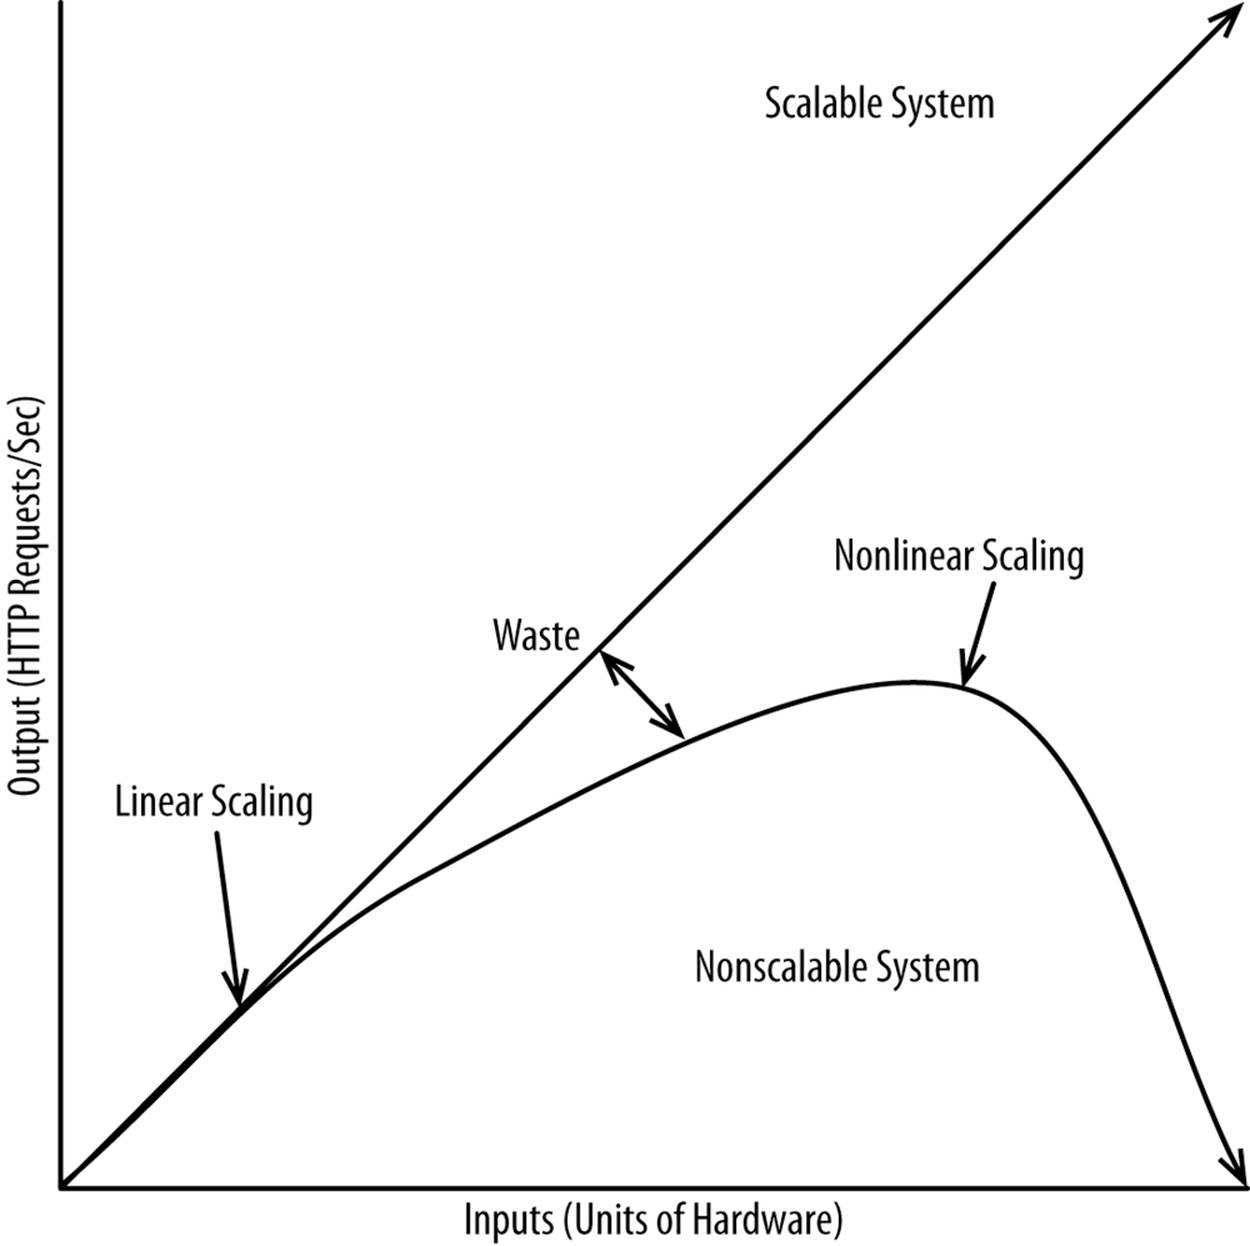 Linear versus nonlinear scaling